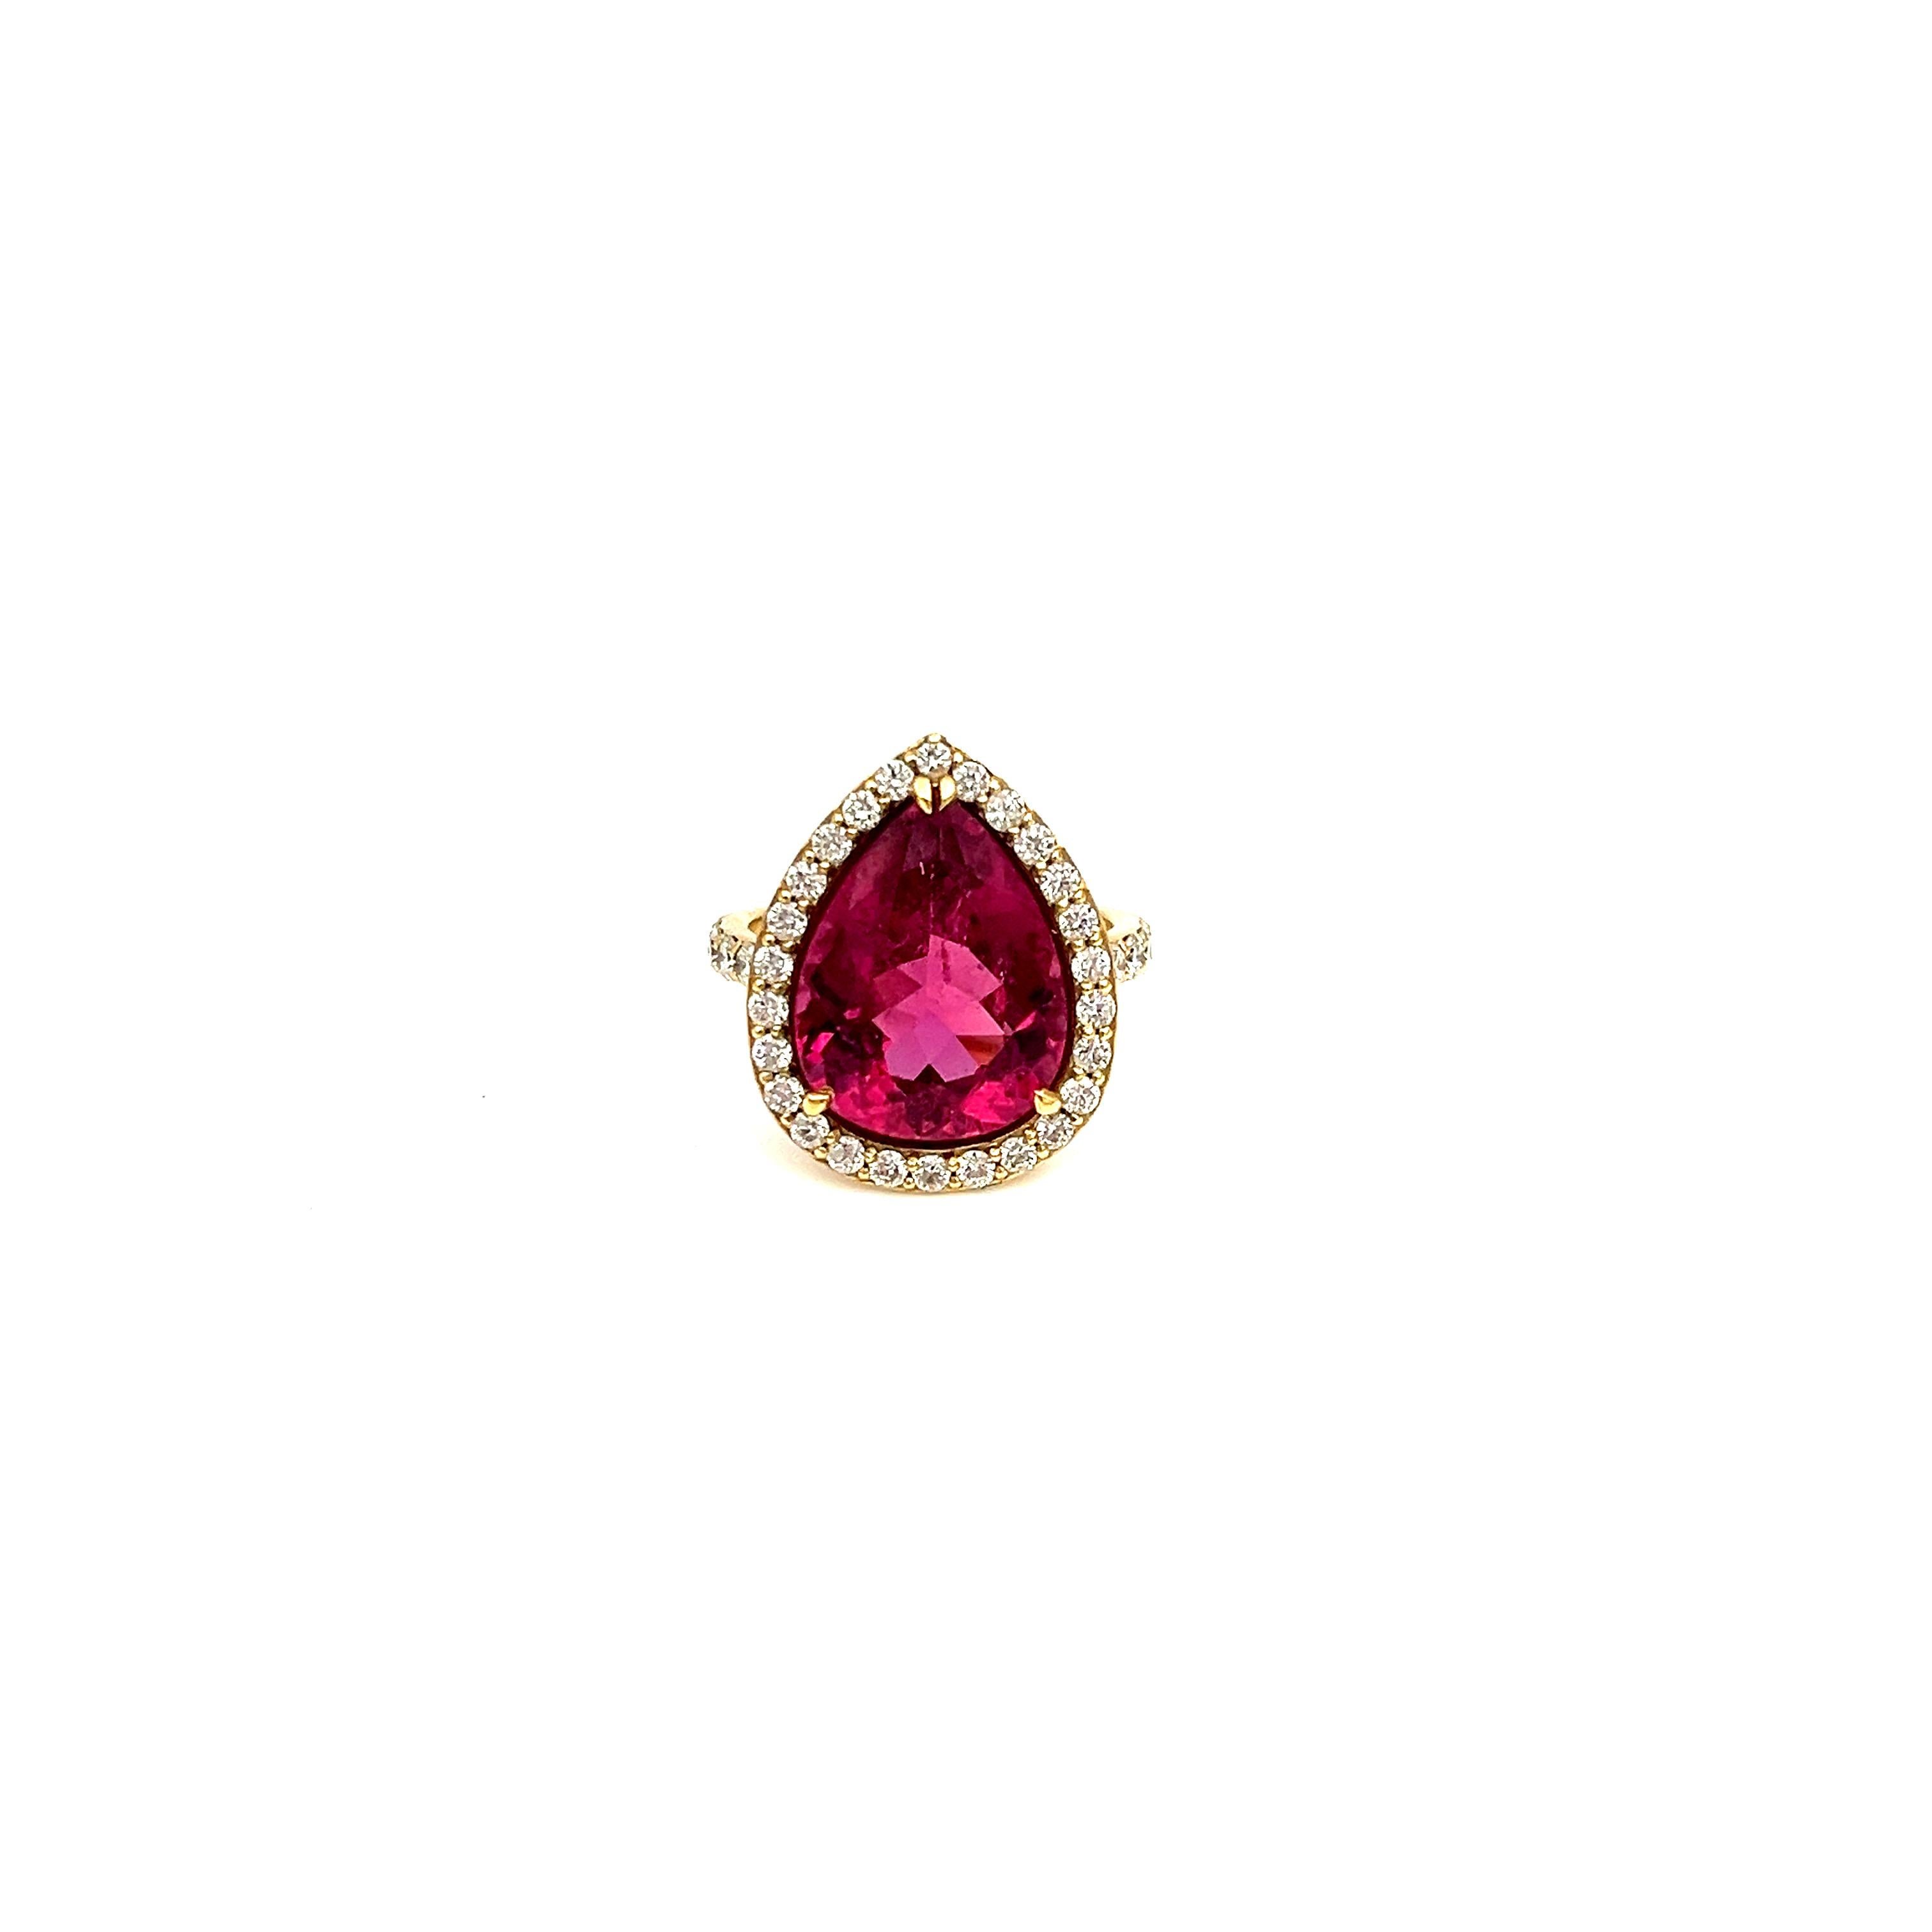 This gorgeous natural rubellite and diamond ring features one pear shape natural rubellite weighing 6.90 ct and has a redish/pinkish hue. The ring also has 38 round brilliant cut diamonds weighing 0.85 ct and graded E-F in color and VS1 in